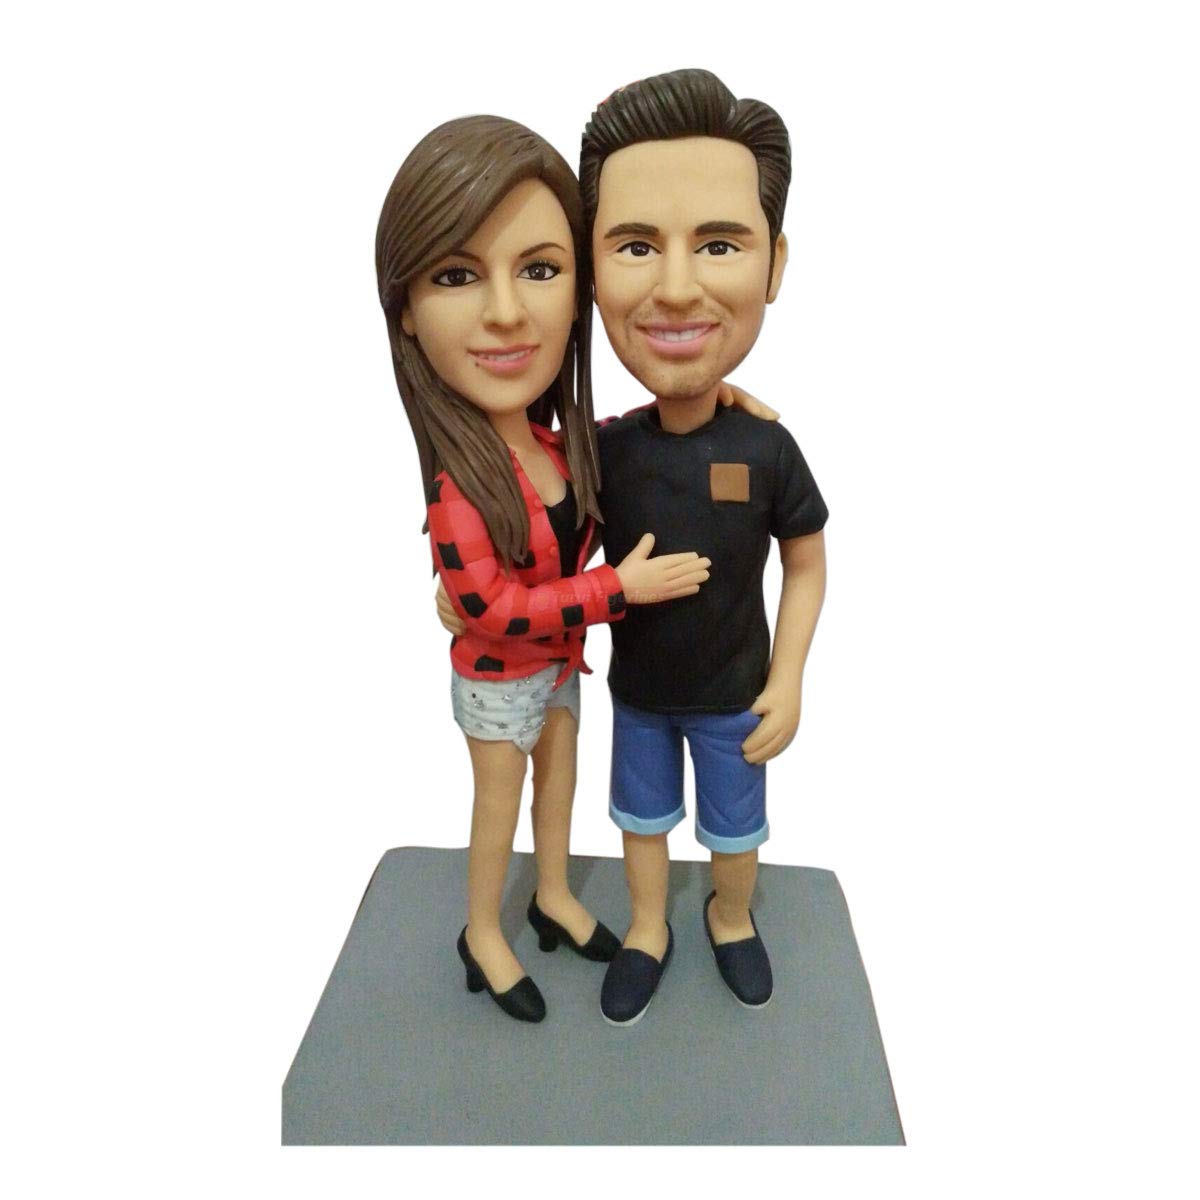 Here are three advantages of purchasing custom bobbleheads